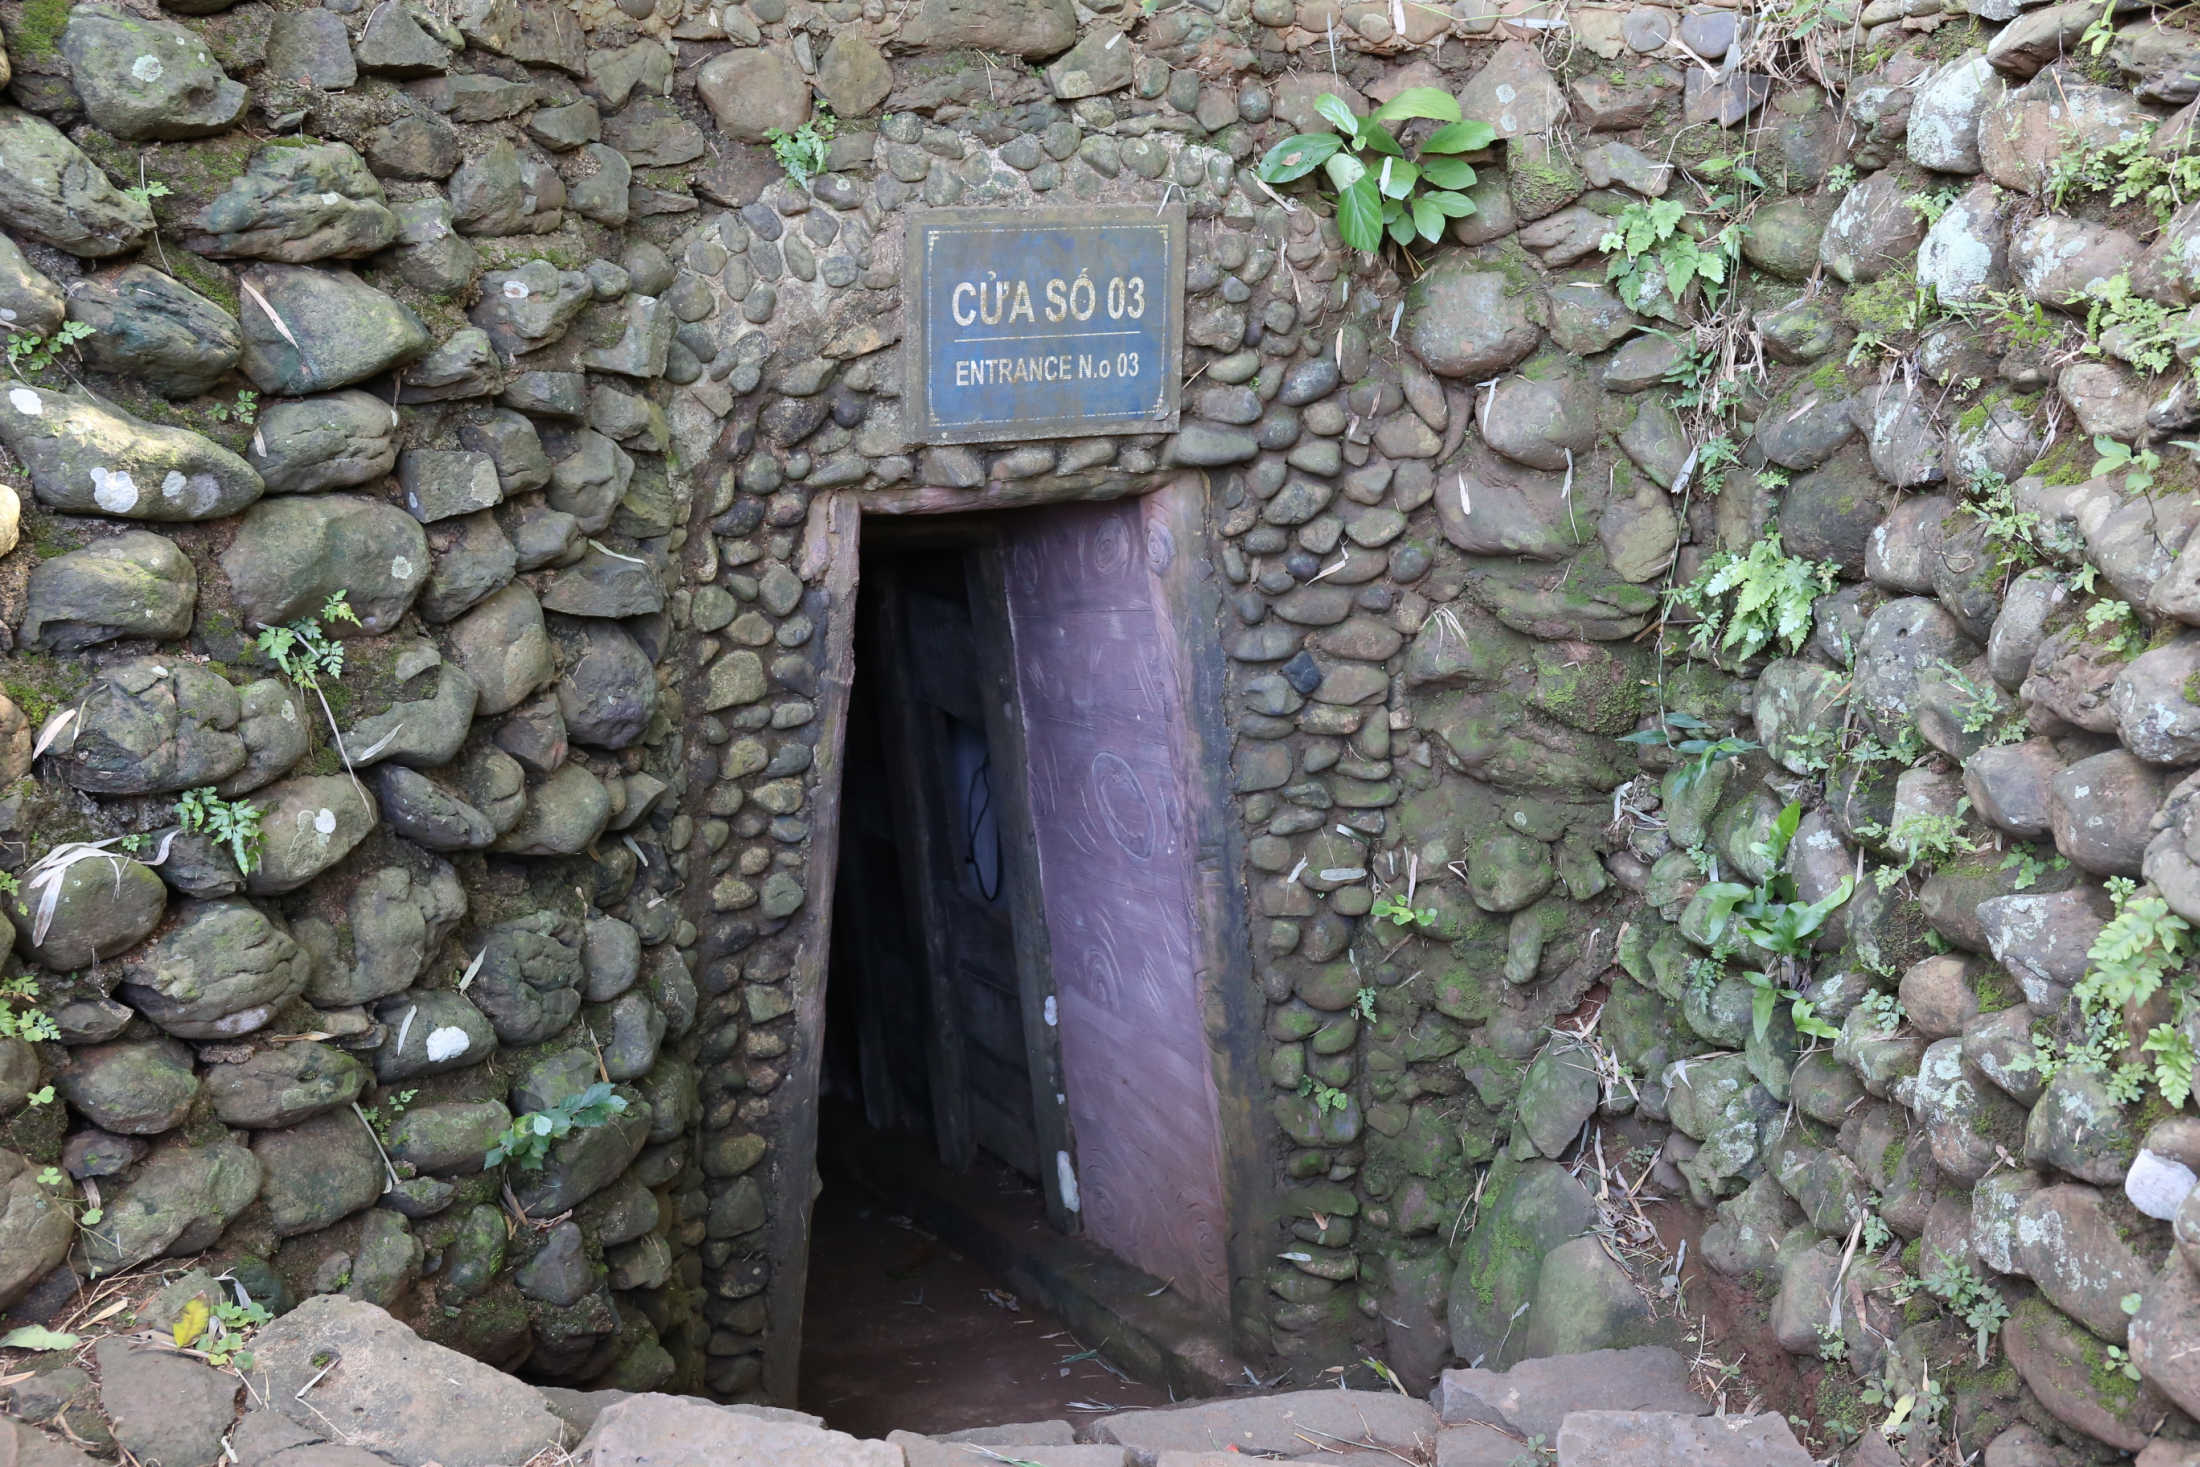 Vinh Moc Tunnels: Explore the underground tunnel complex that served as a shelter during the Vietnam War in Quang Tri Province.